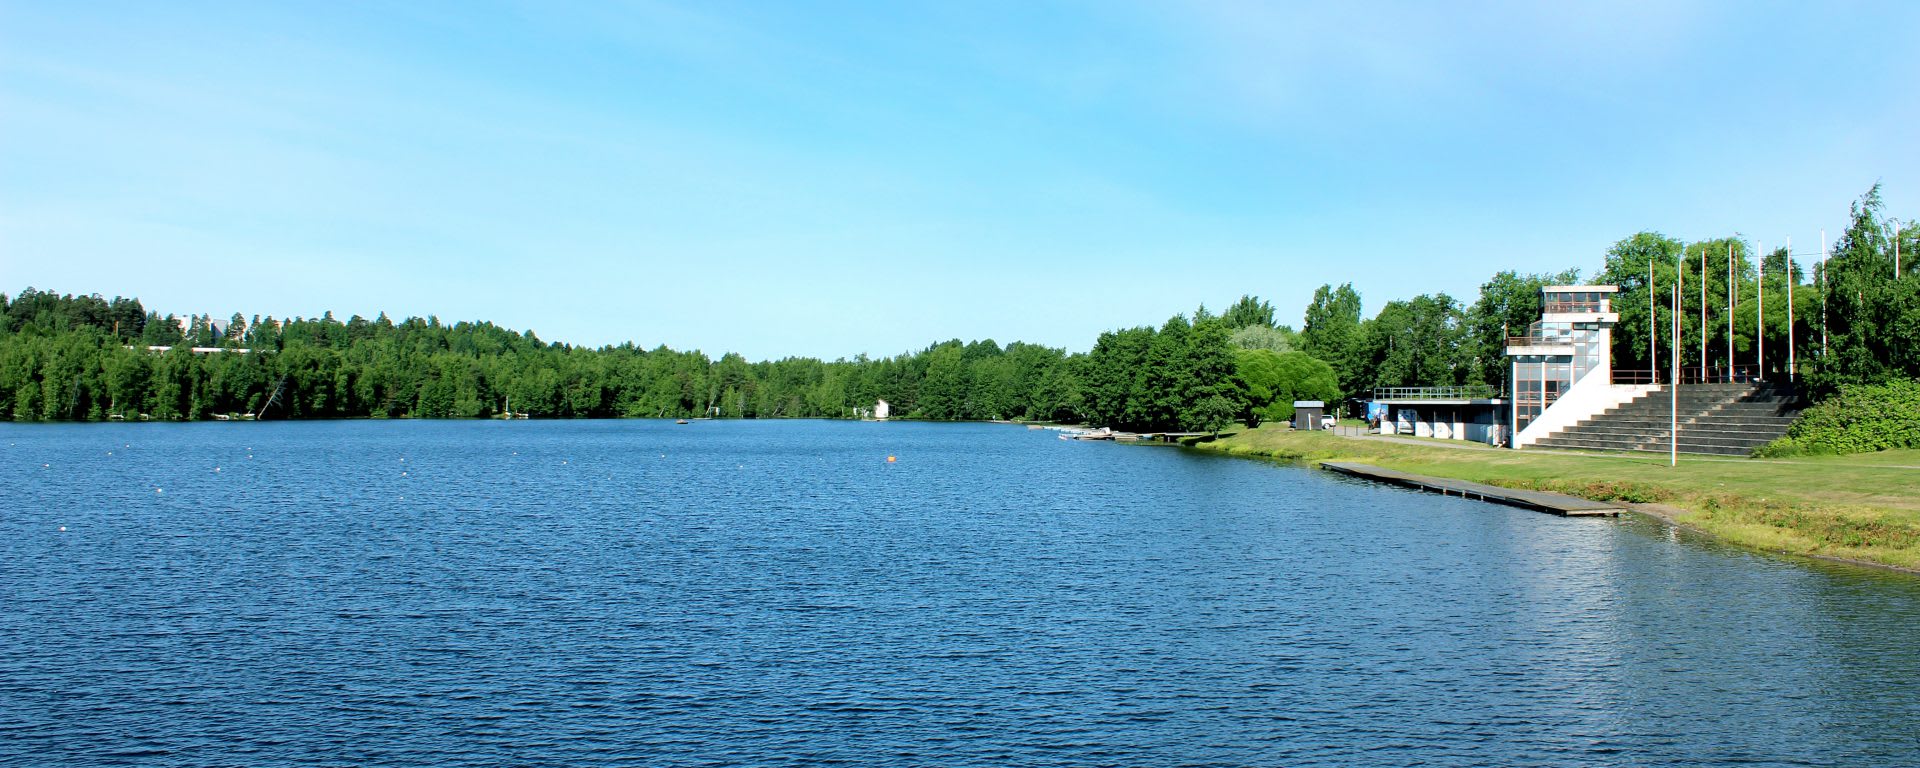 Kaukajärvi Rowing and Canoeing Centre on a beautiful summer day